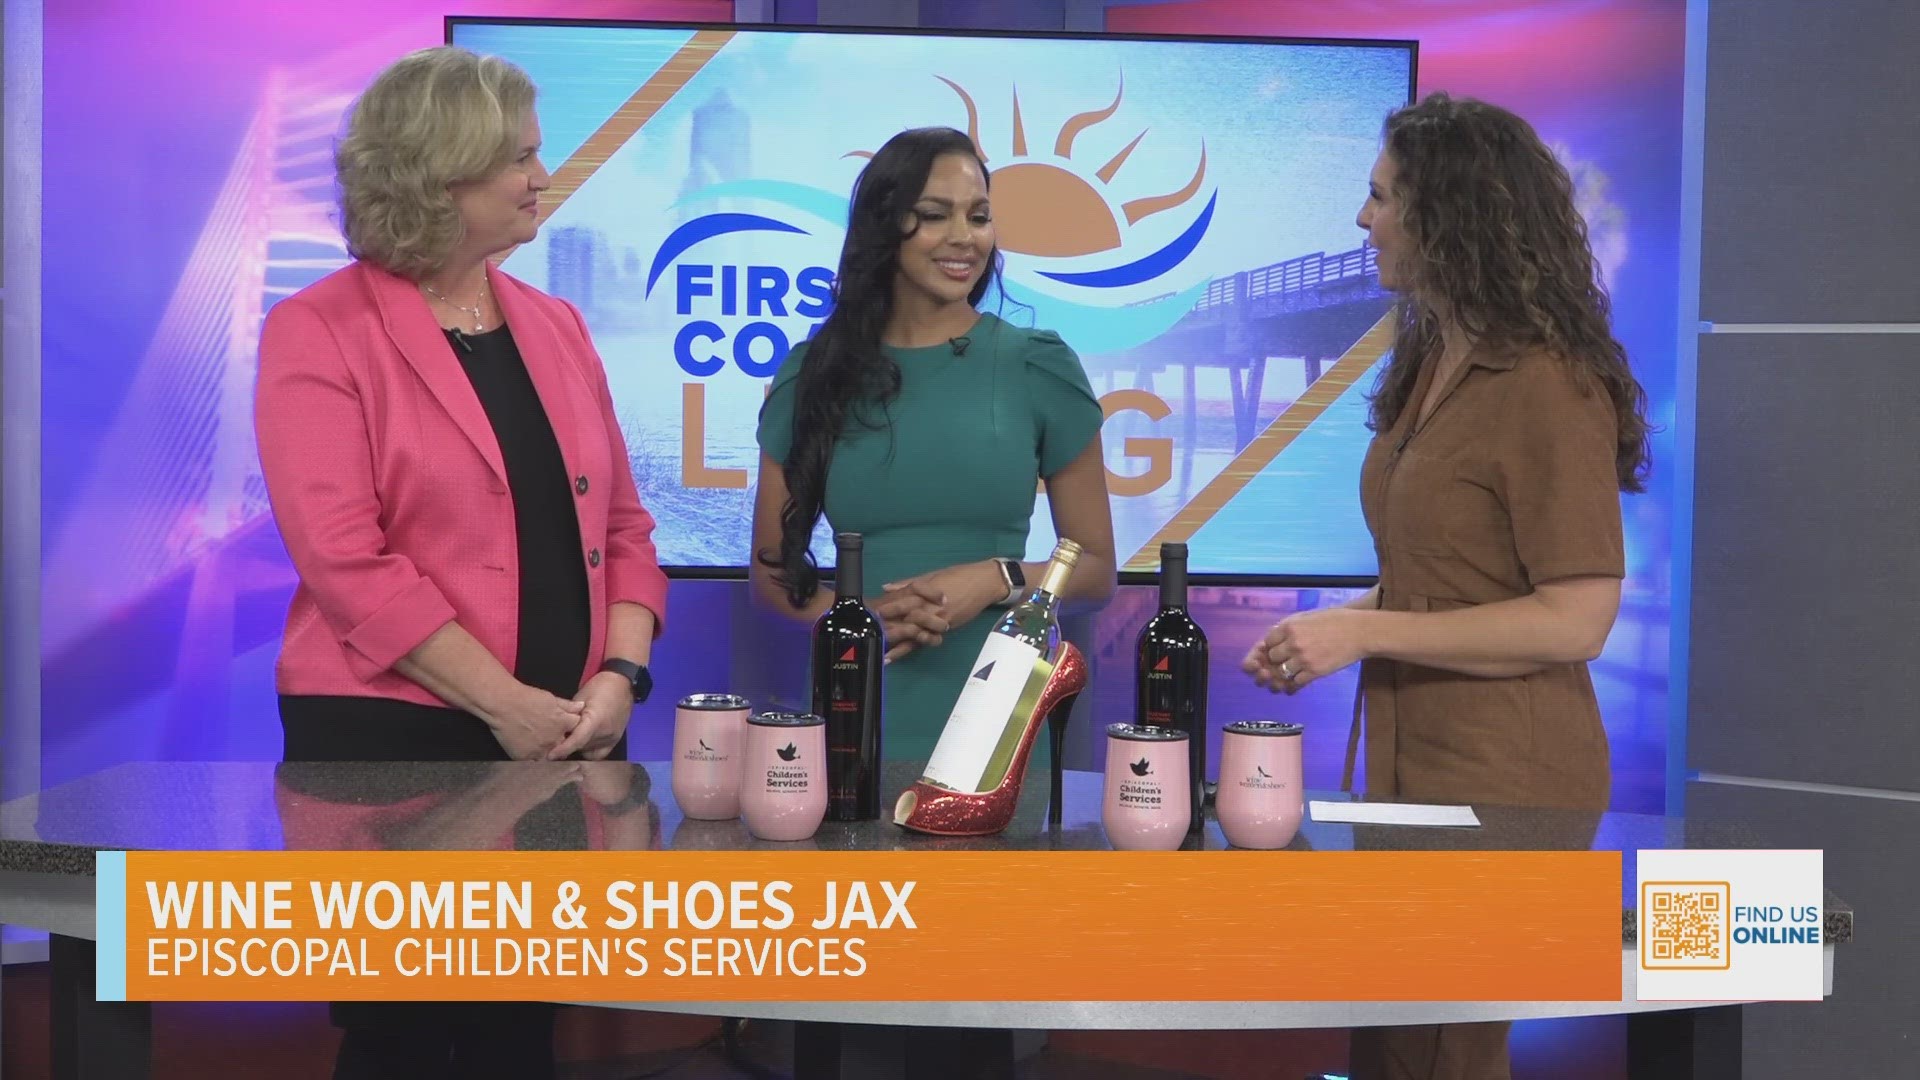 Talking Wine Women & Shoes plus a new CEO with Episcopal Children's Services